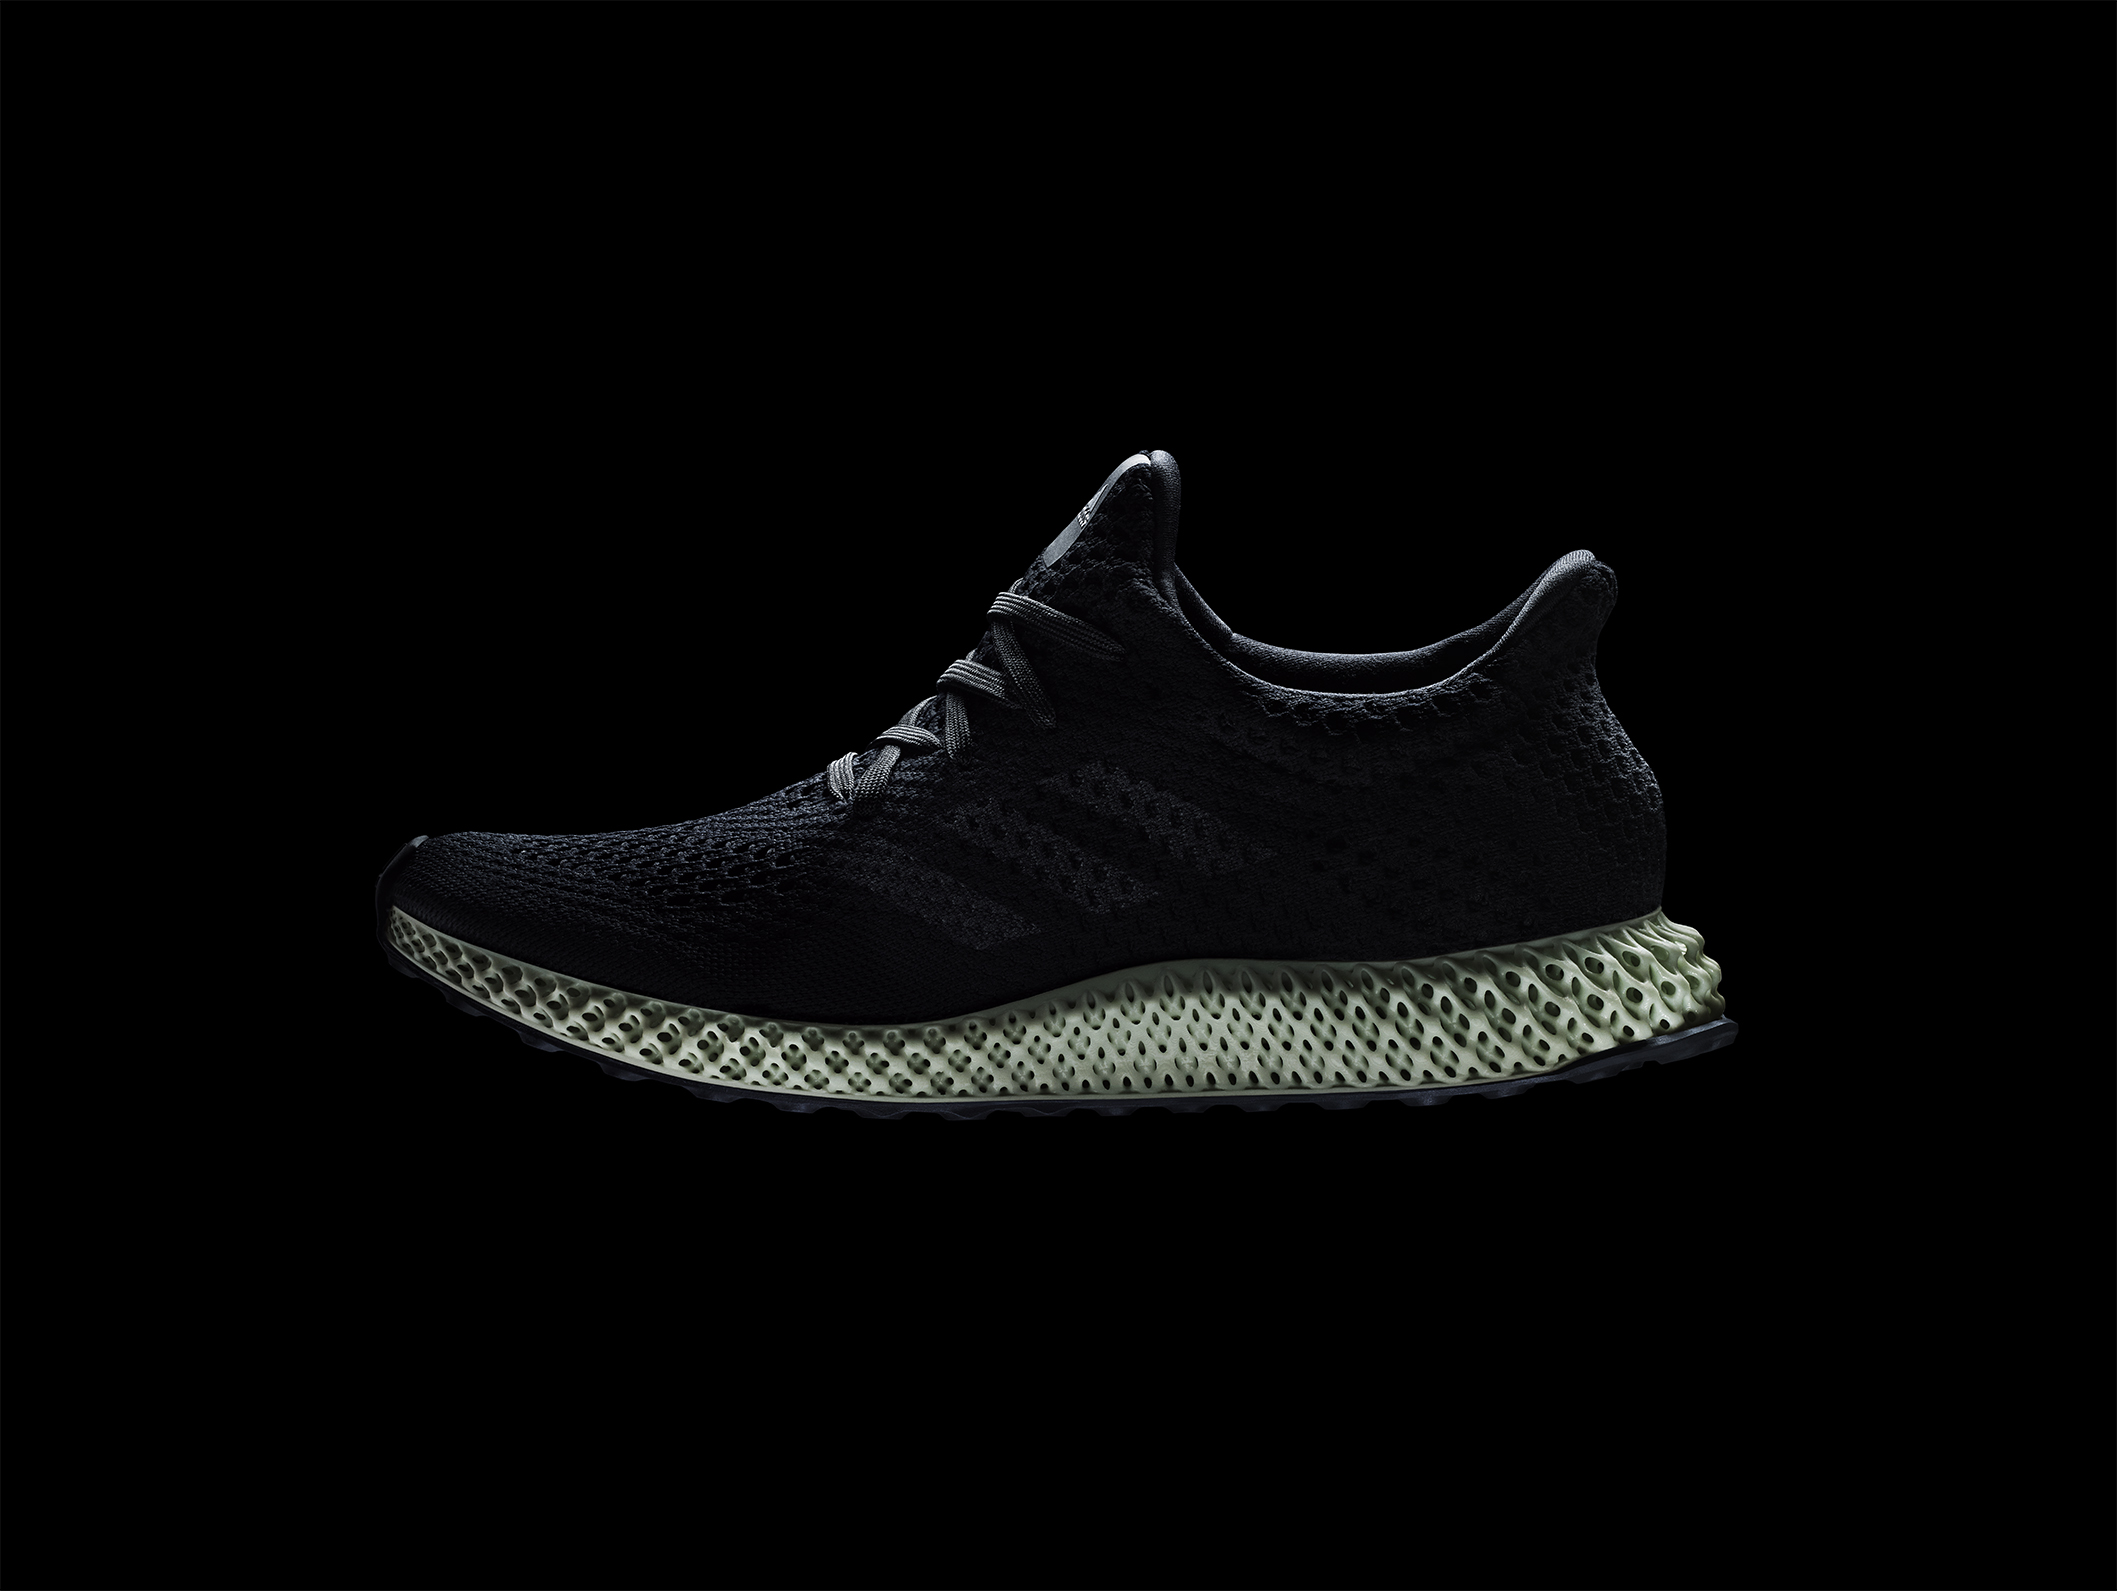 With 3D Printing Technology from Carbon, Adidas Releases First Partially 3D Printed Athletic Shoe to Be Produced at Scale 3DPrint.com | The Voice of 3D Printing / Additive Manufacturing